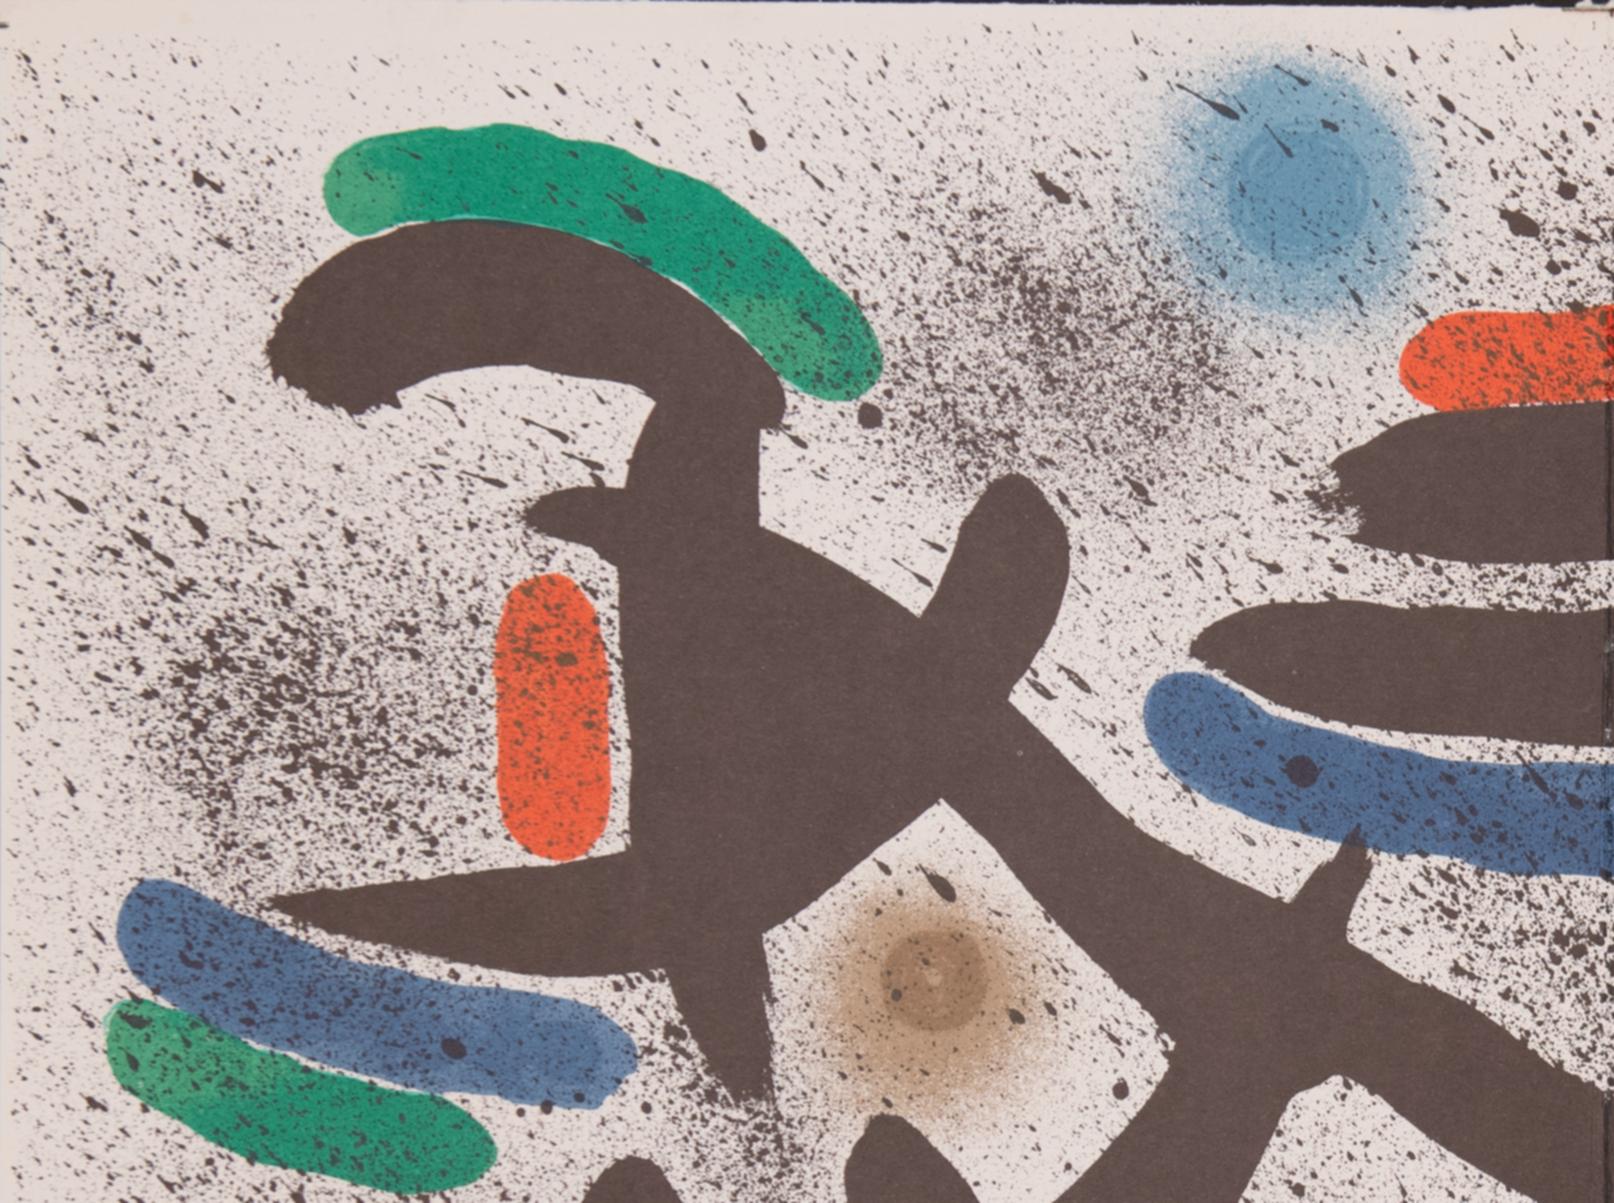 Litografo (Volume I) Italian edition from 1972.

Catalogue of works: Cramer 160.

Slight book fold in the centre of the paper.

Miró's development of a new pictorial language led to a consistent restriction to the primary colours black, green,